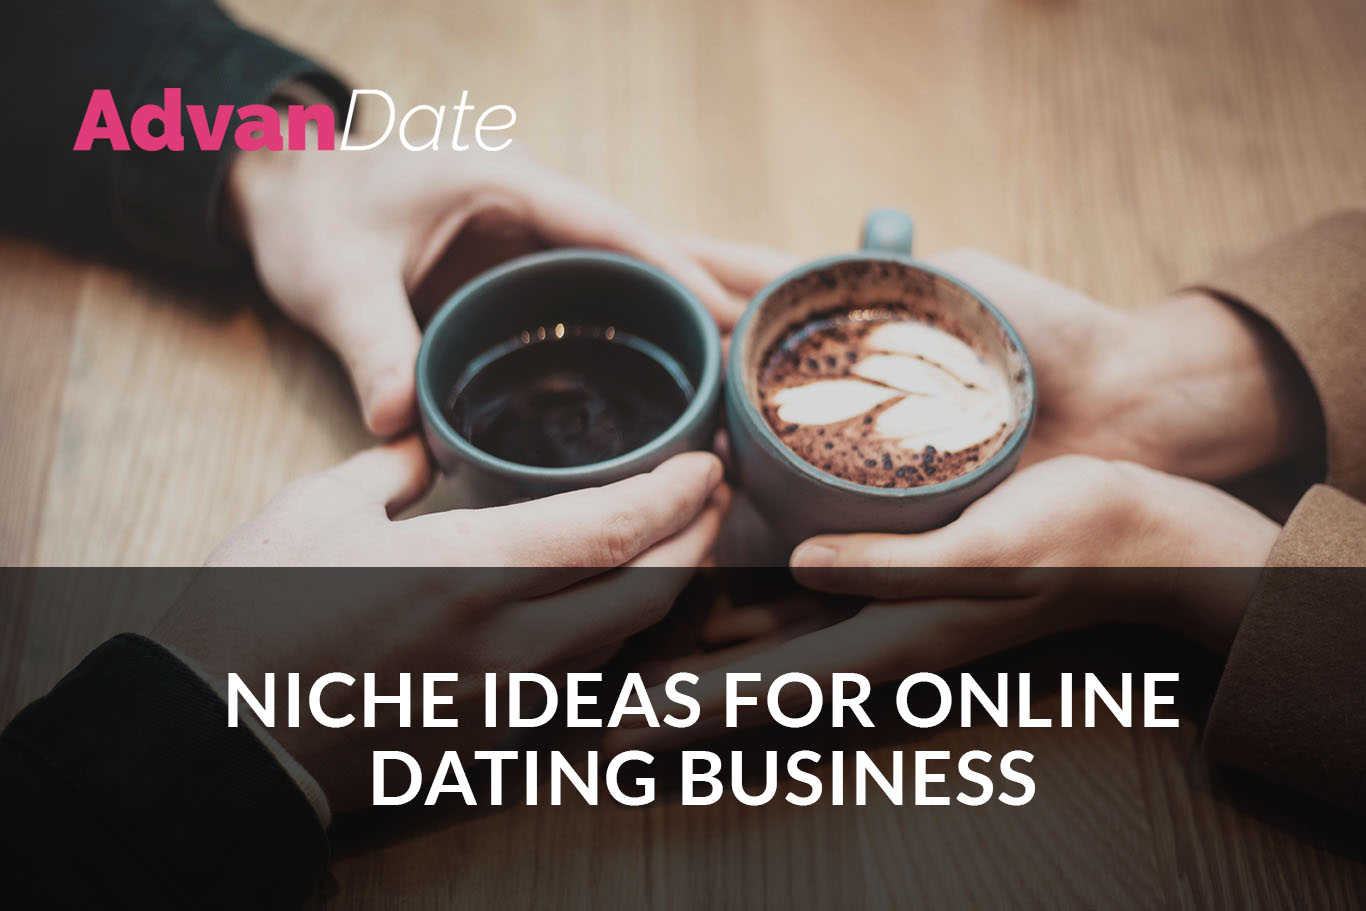 Niche ideas for online dating business